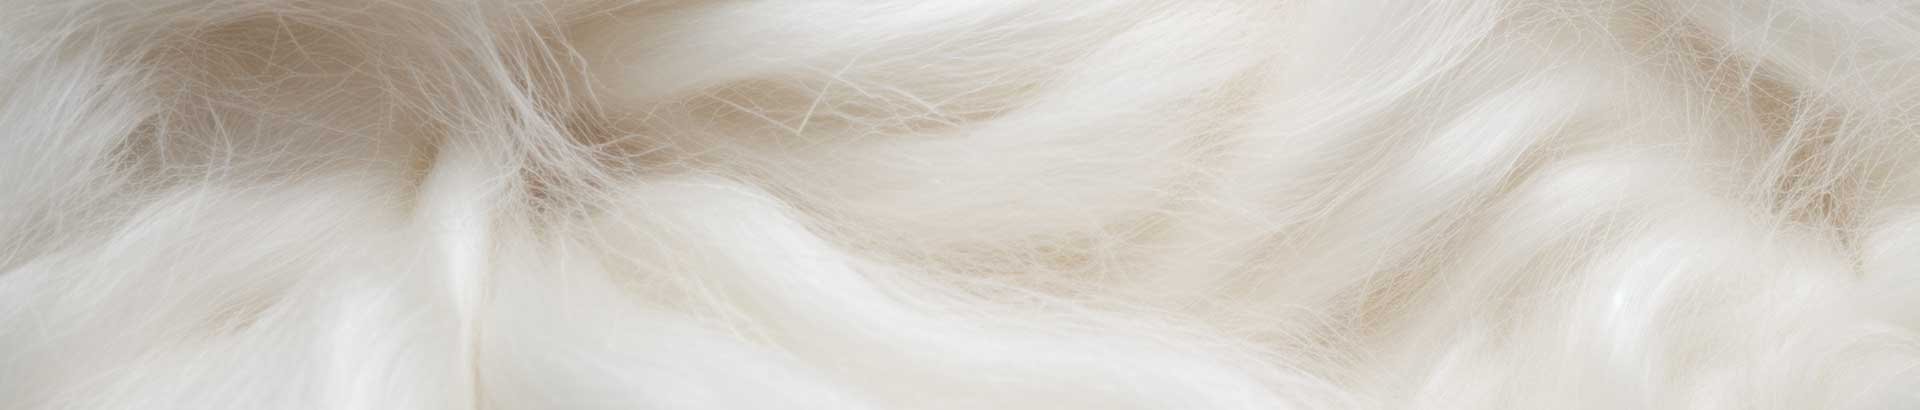 Alpaca wool fibres magnified, showcasing their softness and texture